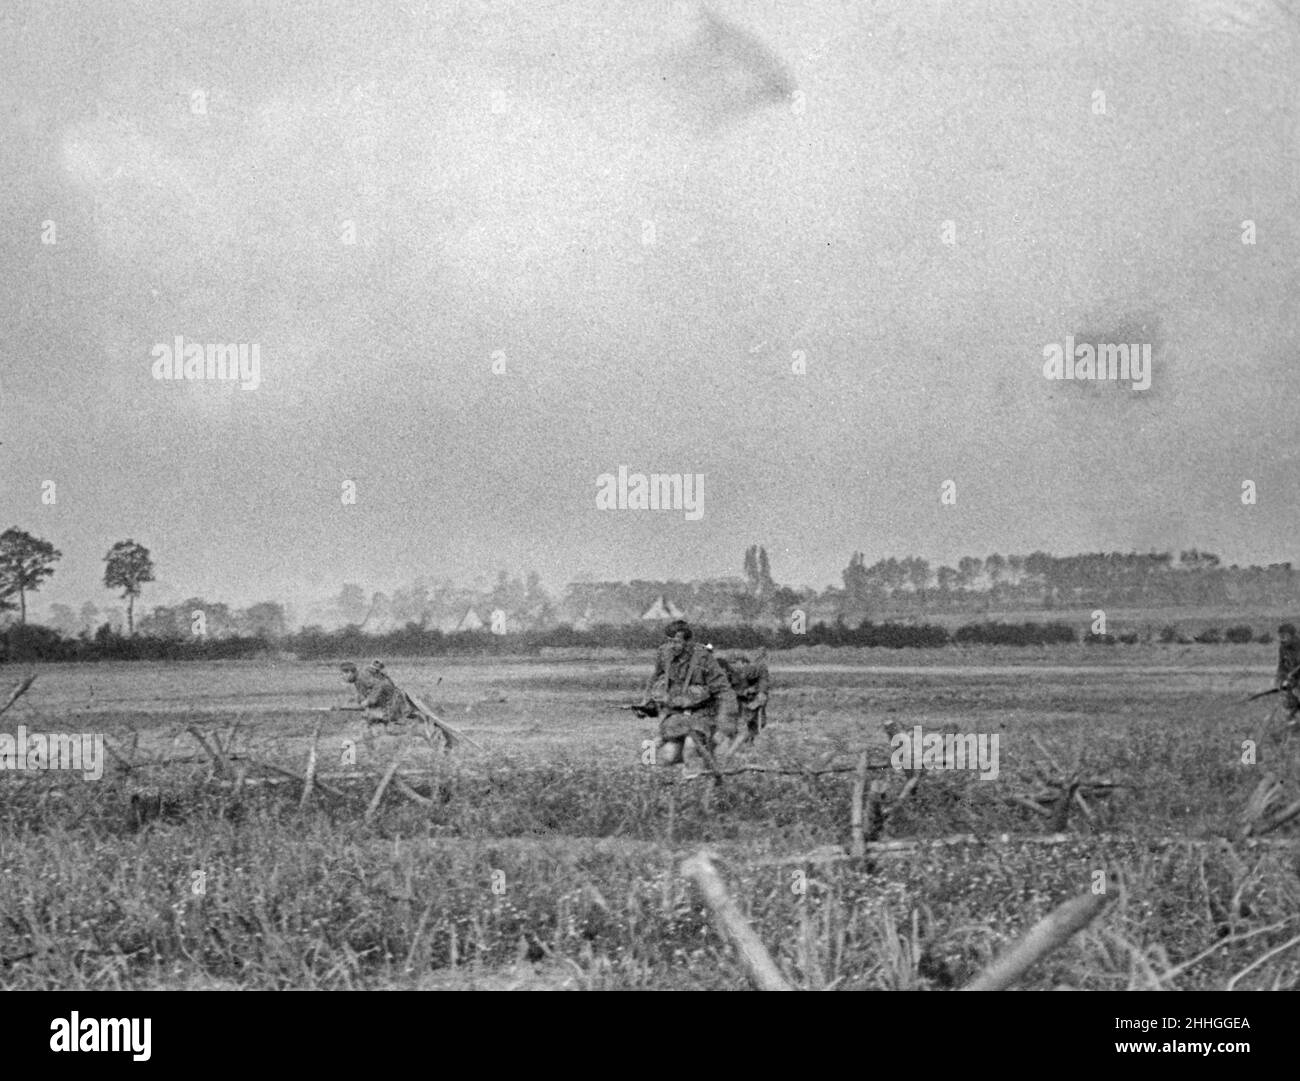 6am 16 June 1915 photograph taken by Private Frederick Fyfe Z Company 1/10th King's Regiment (Liverpool Scottish) who was brought down wounded a few yards in front of a German Advance trench at Bellewaarde Farm near Hooge. Members of the  Z Company 1/10th Kings Regiment are seen charging a German trench which they captured. Stock Photo